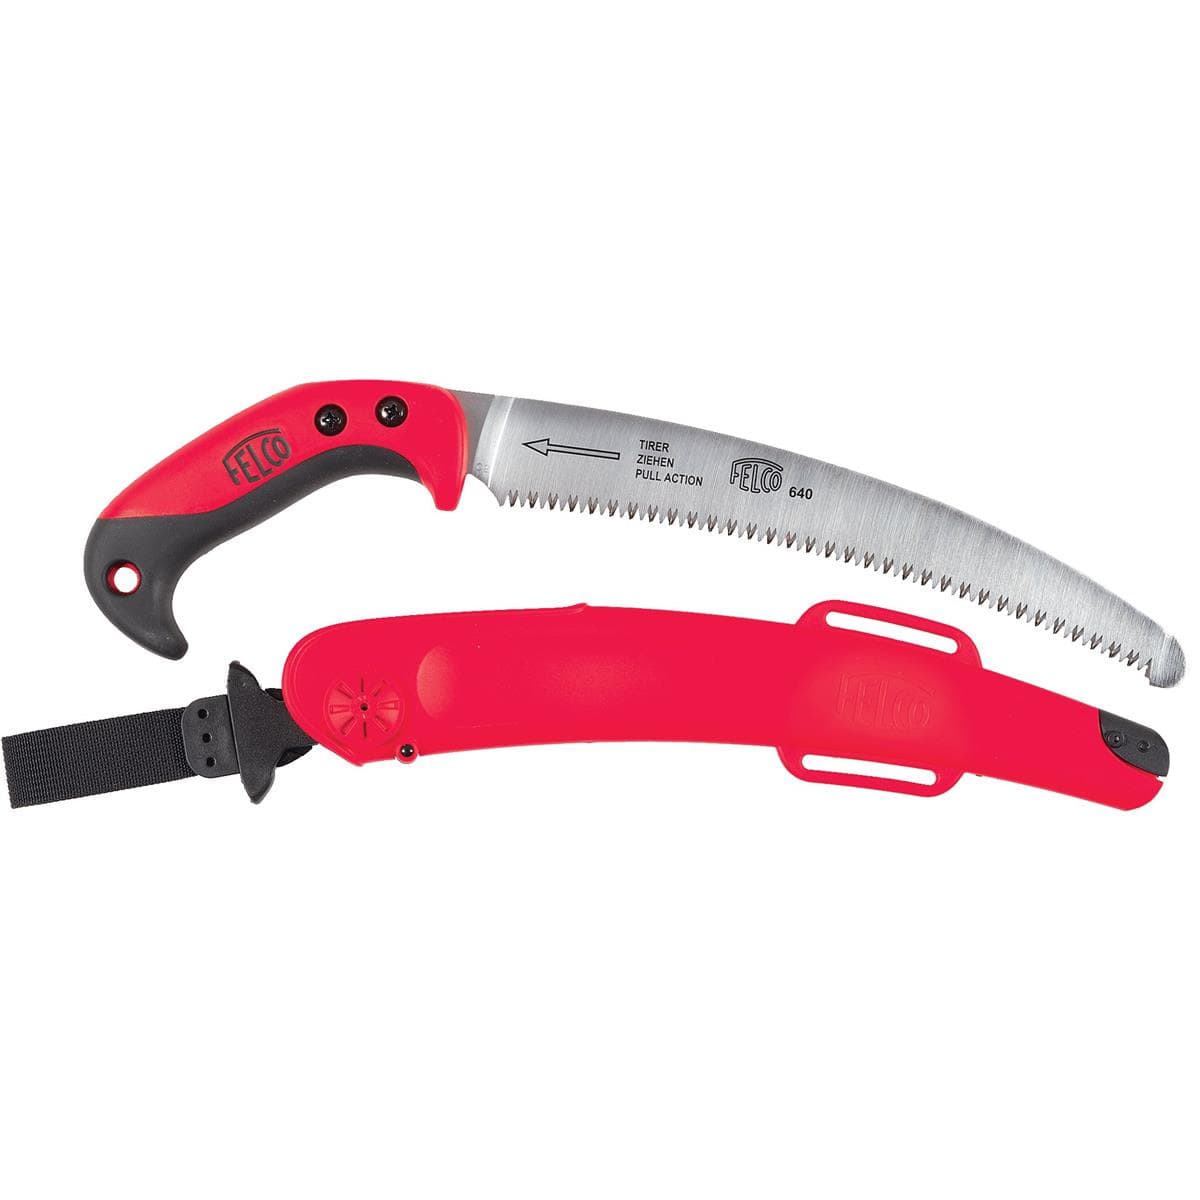 Felco Curved-Blade Pruning Saws